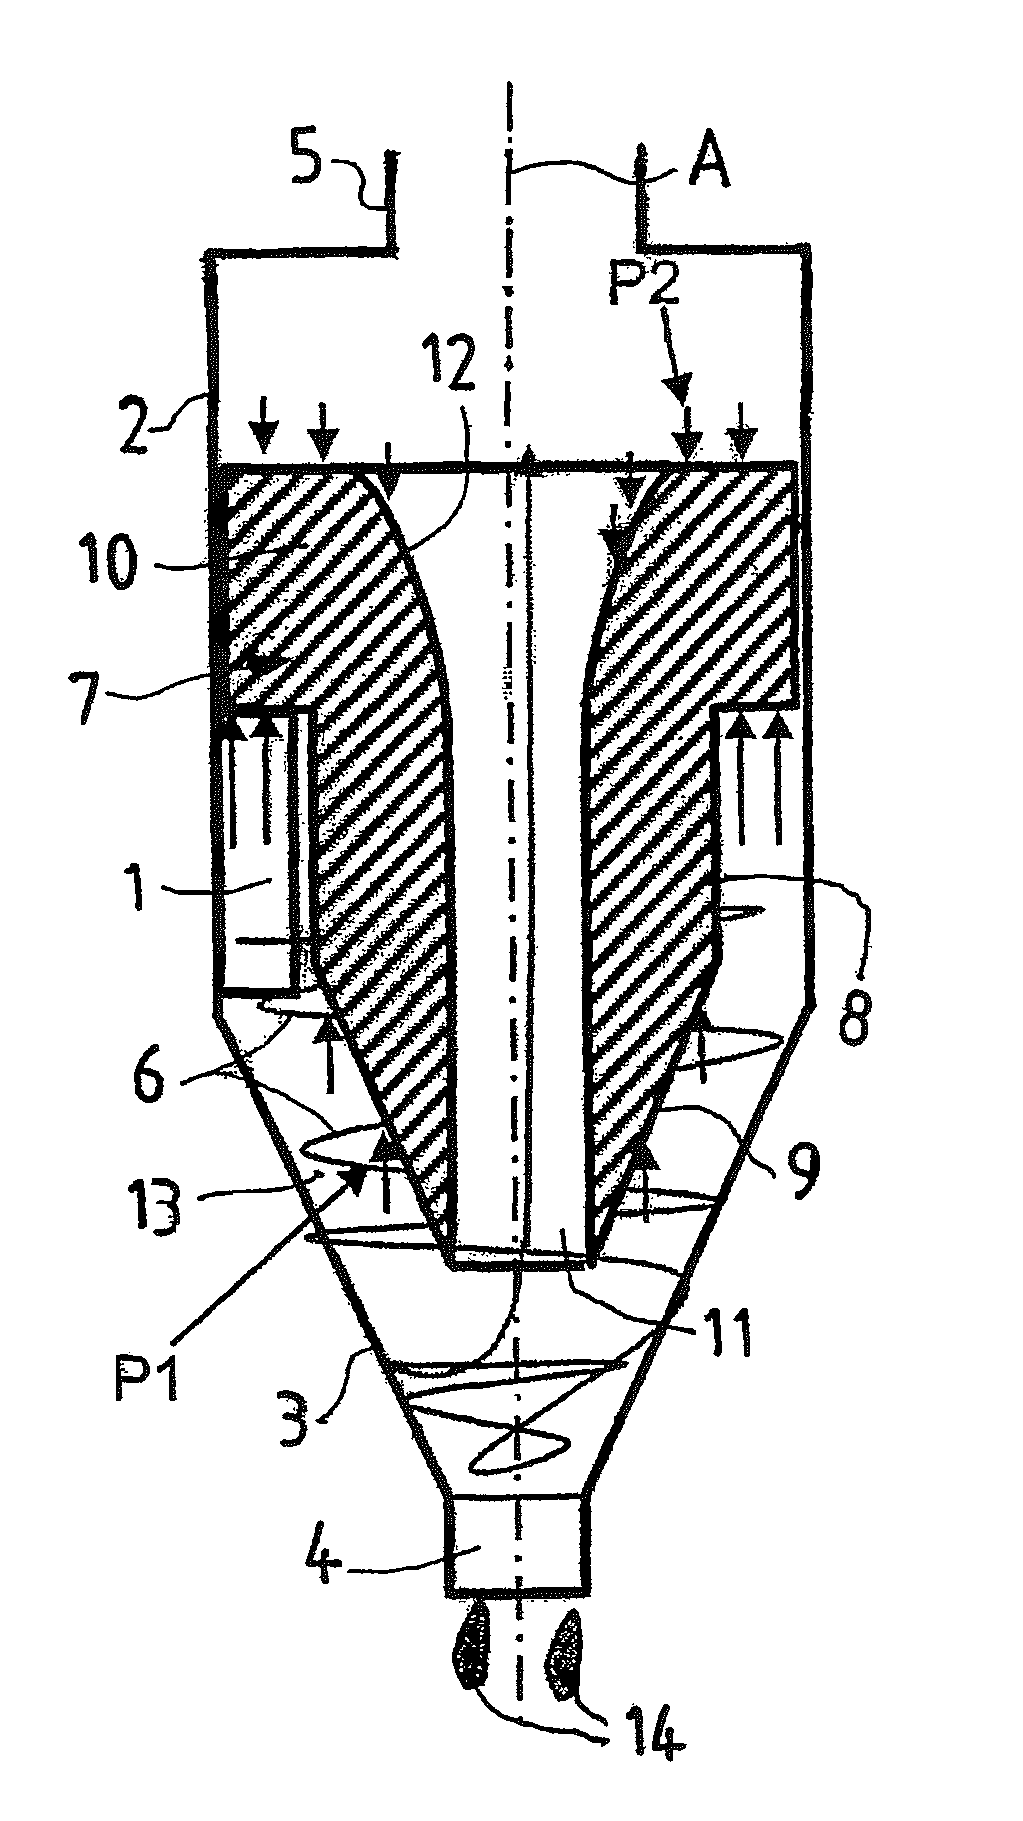 Cyclone separator device for gas-oil separation